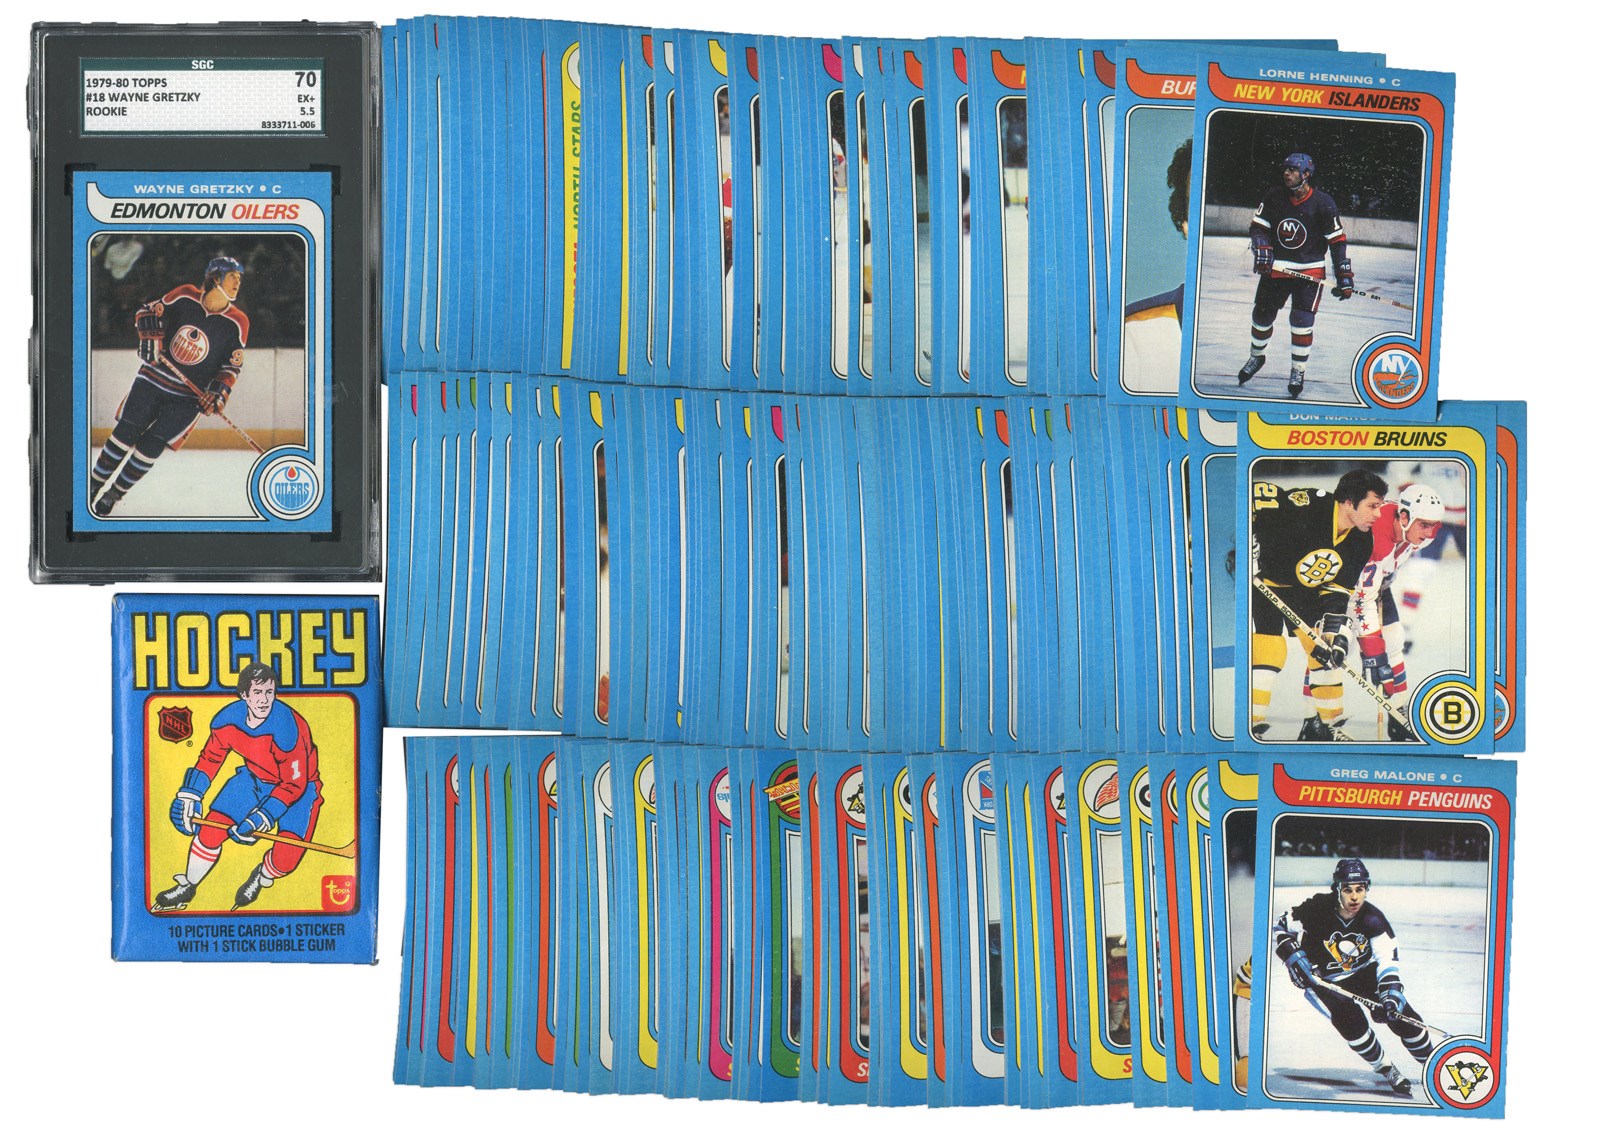 Baseball and Trading Cards - 1979 Topps Hockey Complete Set with Sealed Pack & SGC 70 Gretzky Rookie